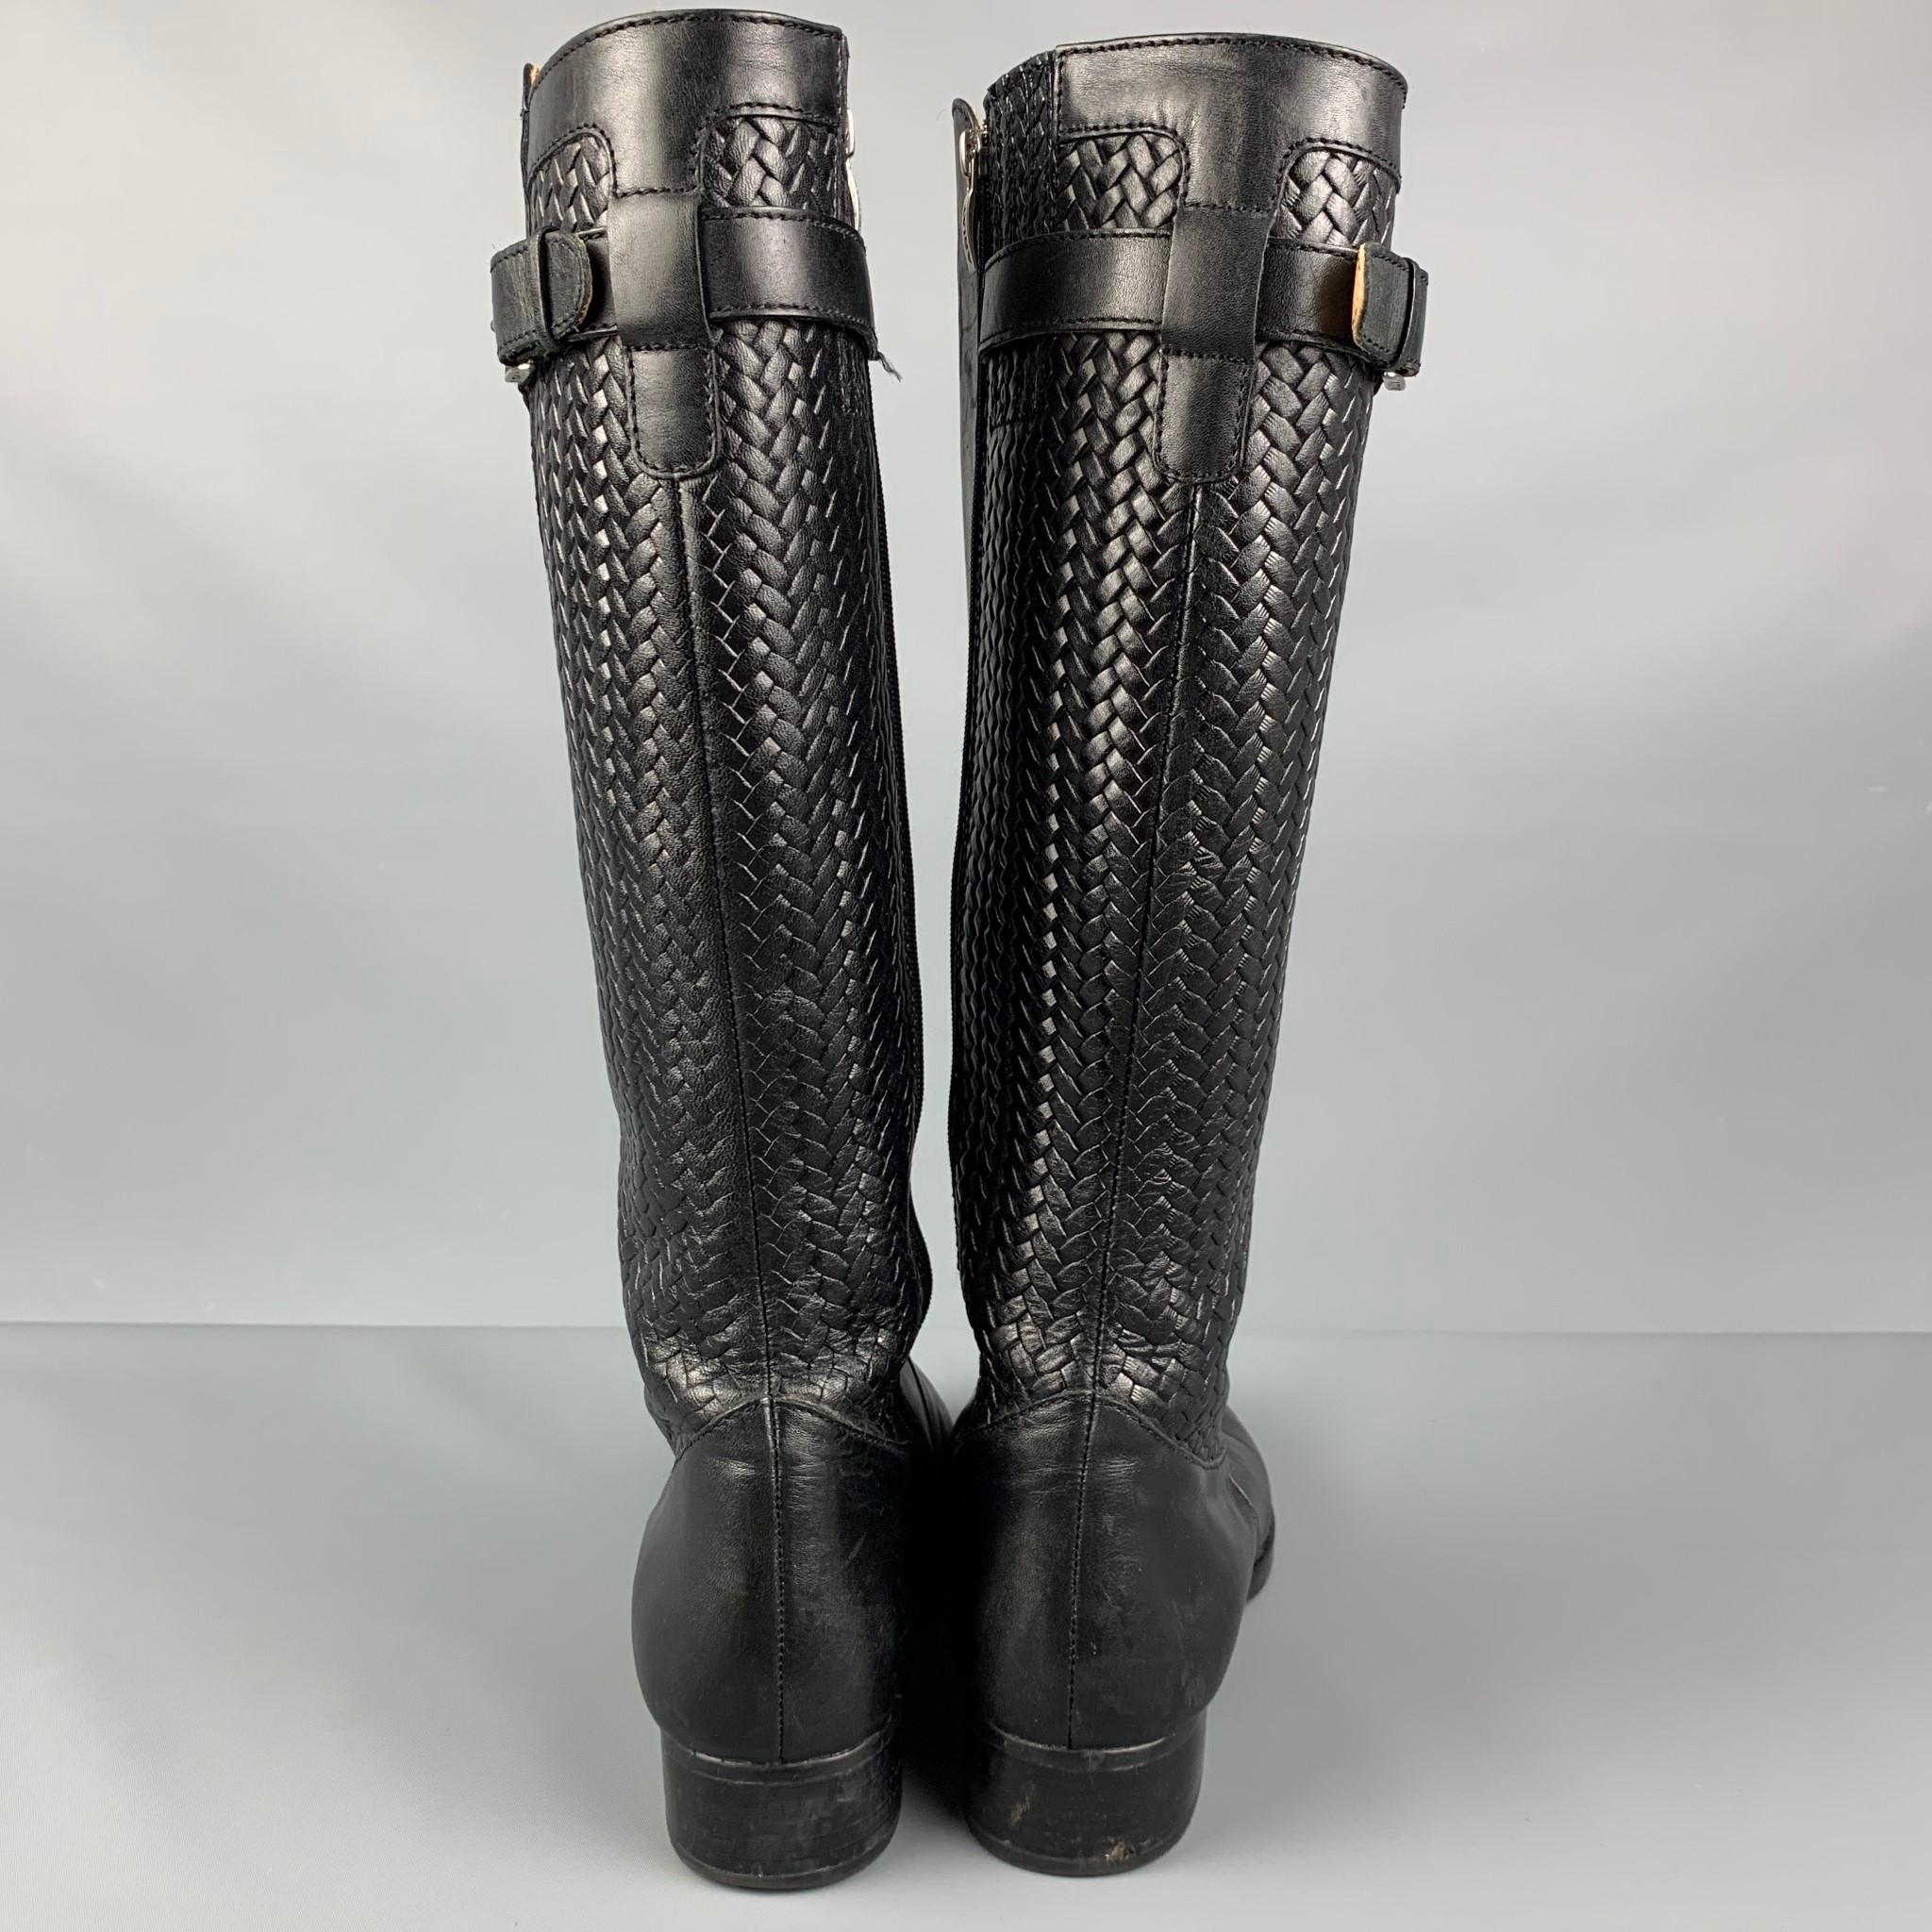 Women's ARIAT Size 7.5 Black Leather Woven Boots